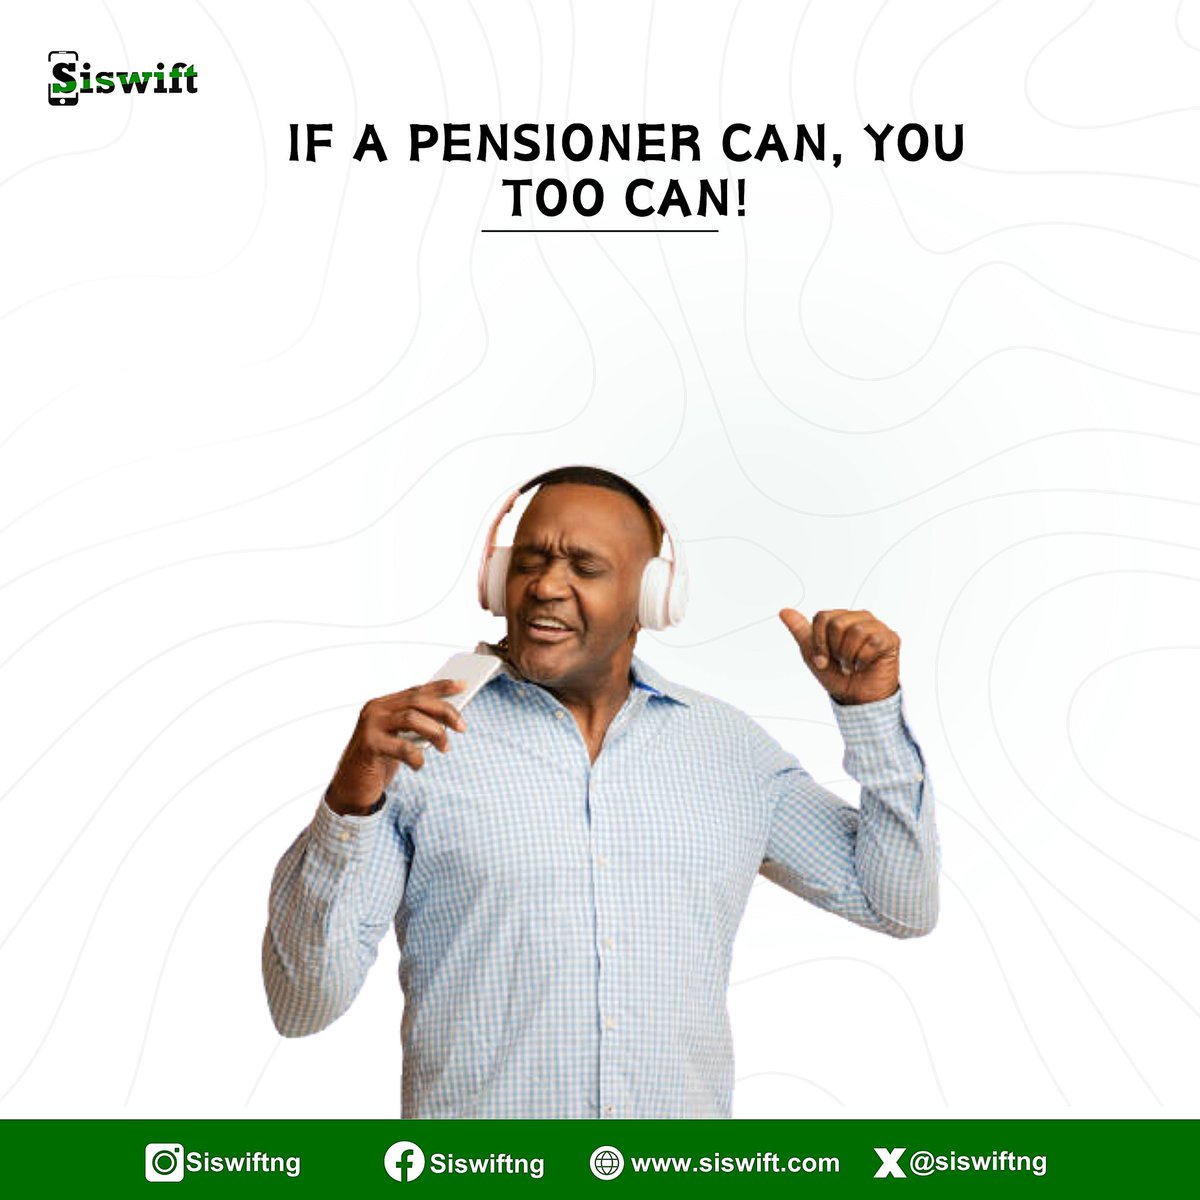 Unlock Your Potential with Siswift Phone Deals. 

If a pensioner can, so can you!
.
.
.
#transparenttransactions #negotiationpower #changingthegame #convenience #convenienceoverfixedprices #digitalmarketing #siswift #iphones #phones